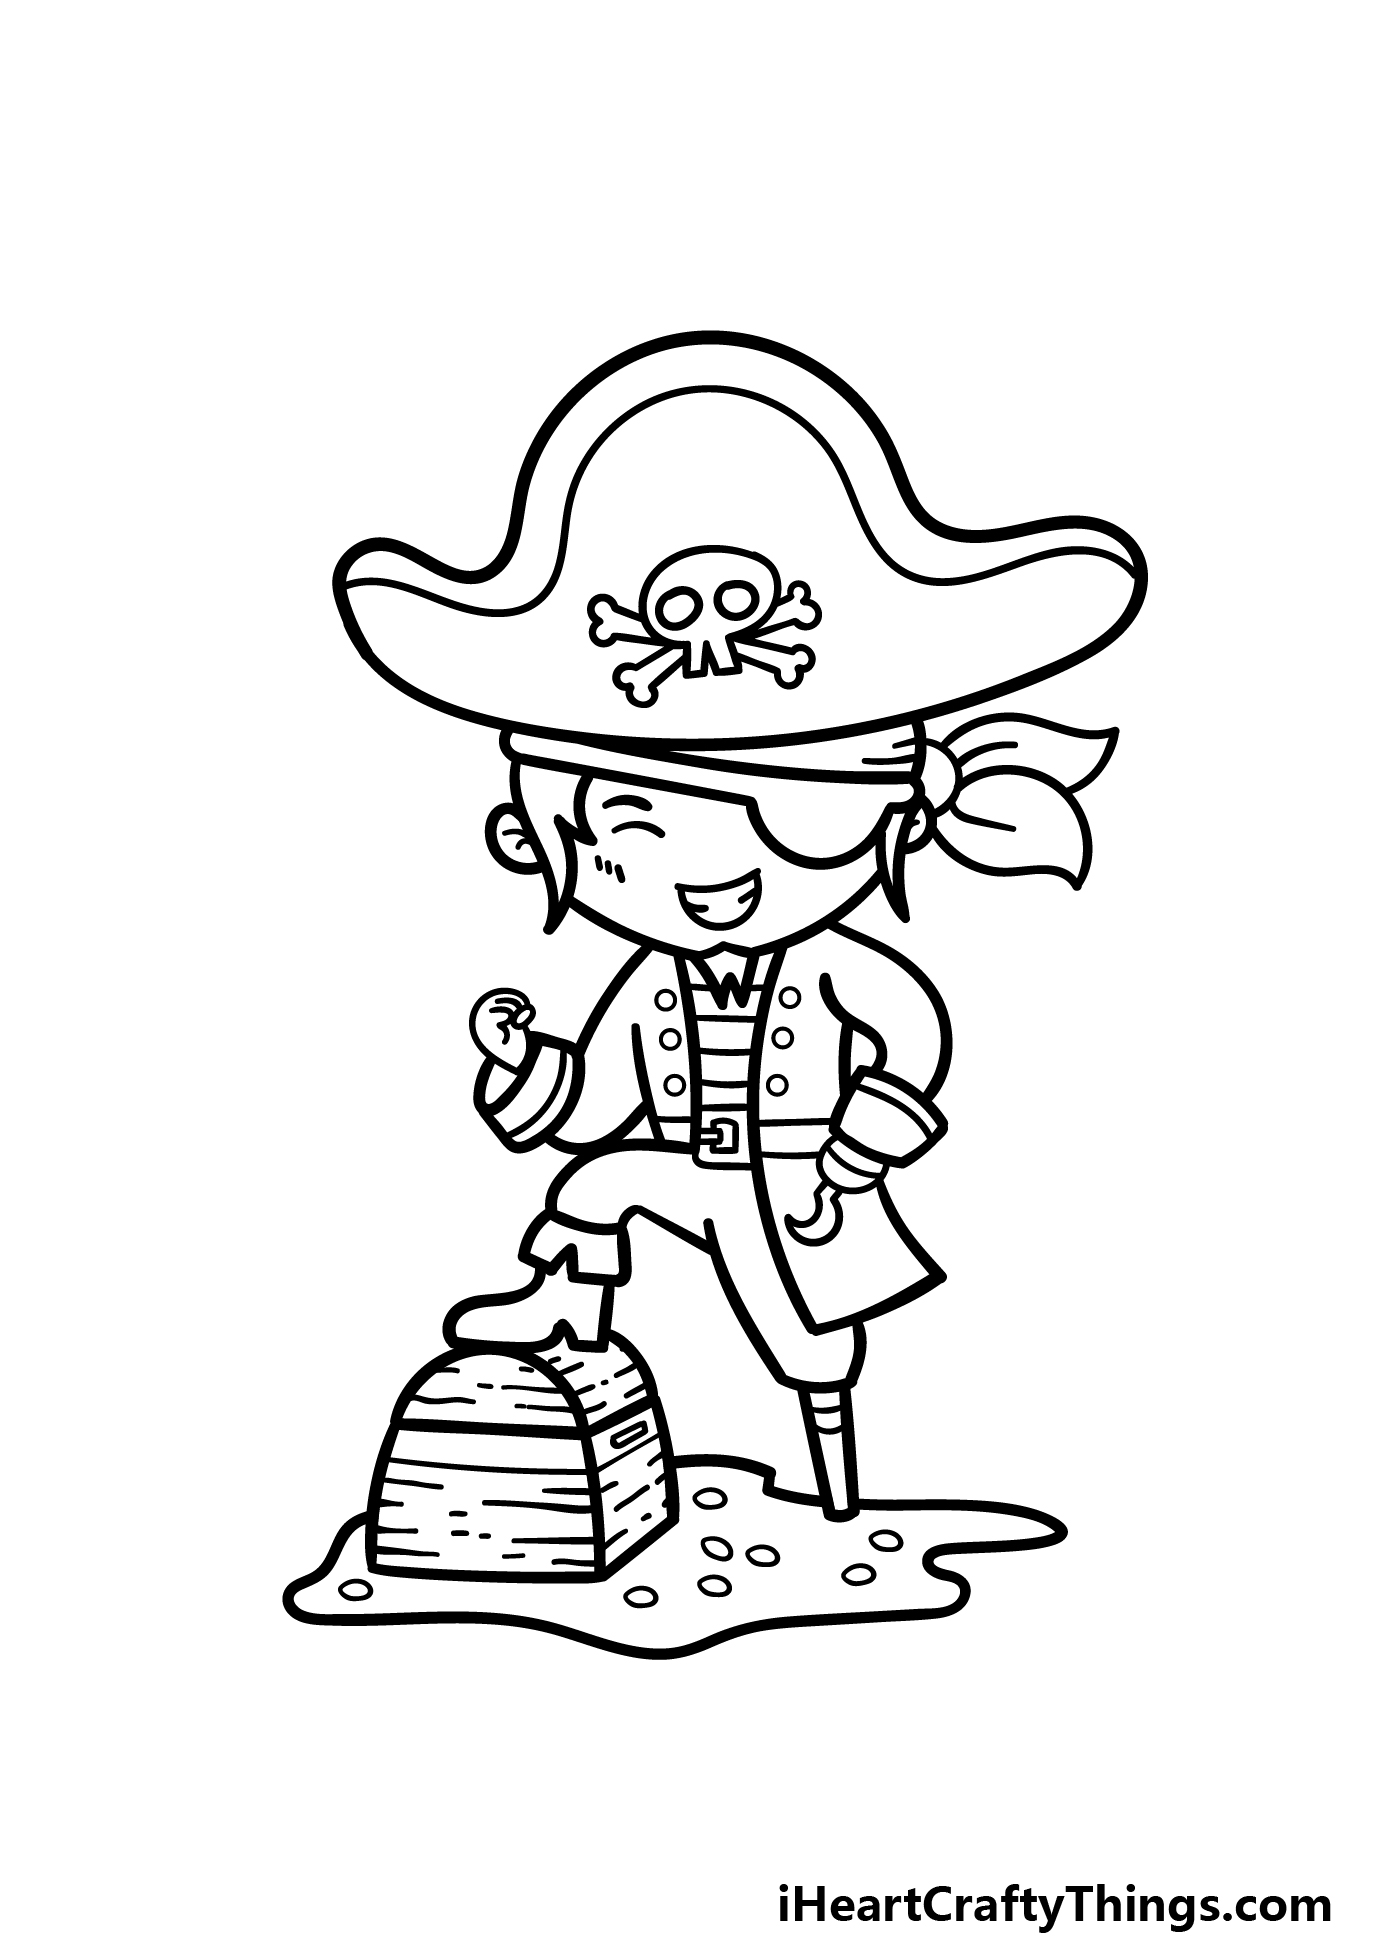 Cartoon Pirate Drawing - How To Draw A Cartoon Pirate Step By Step